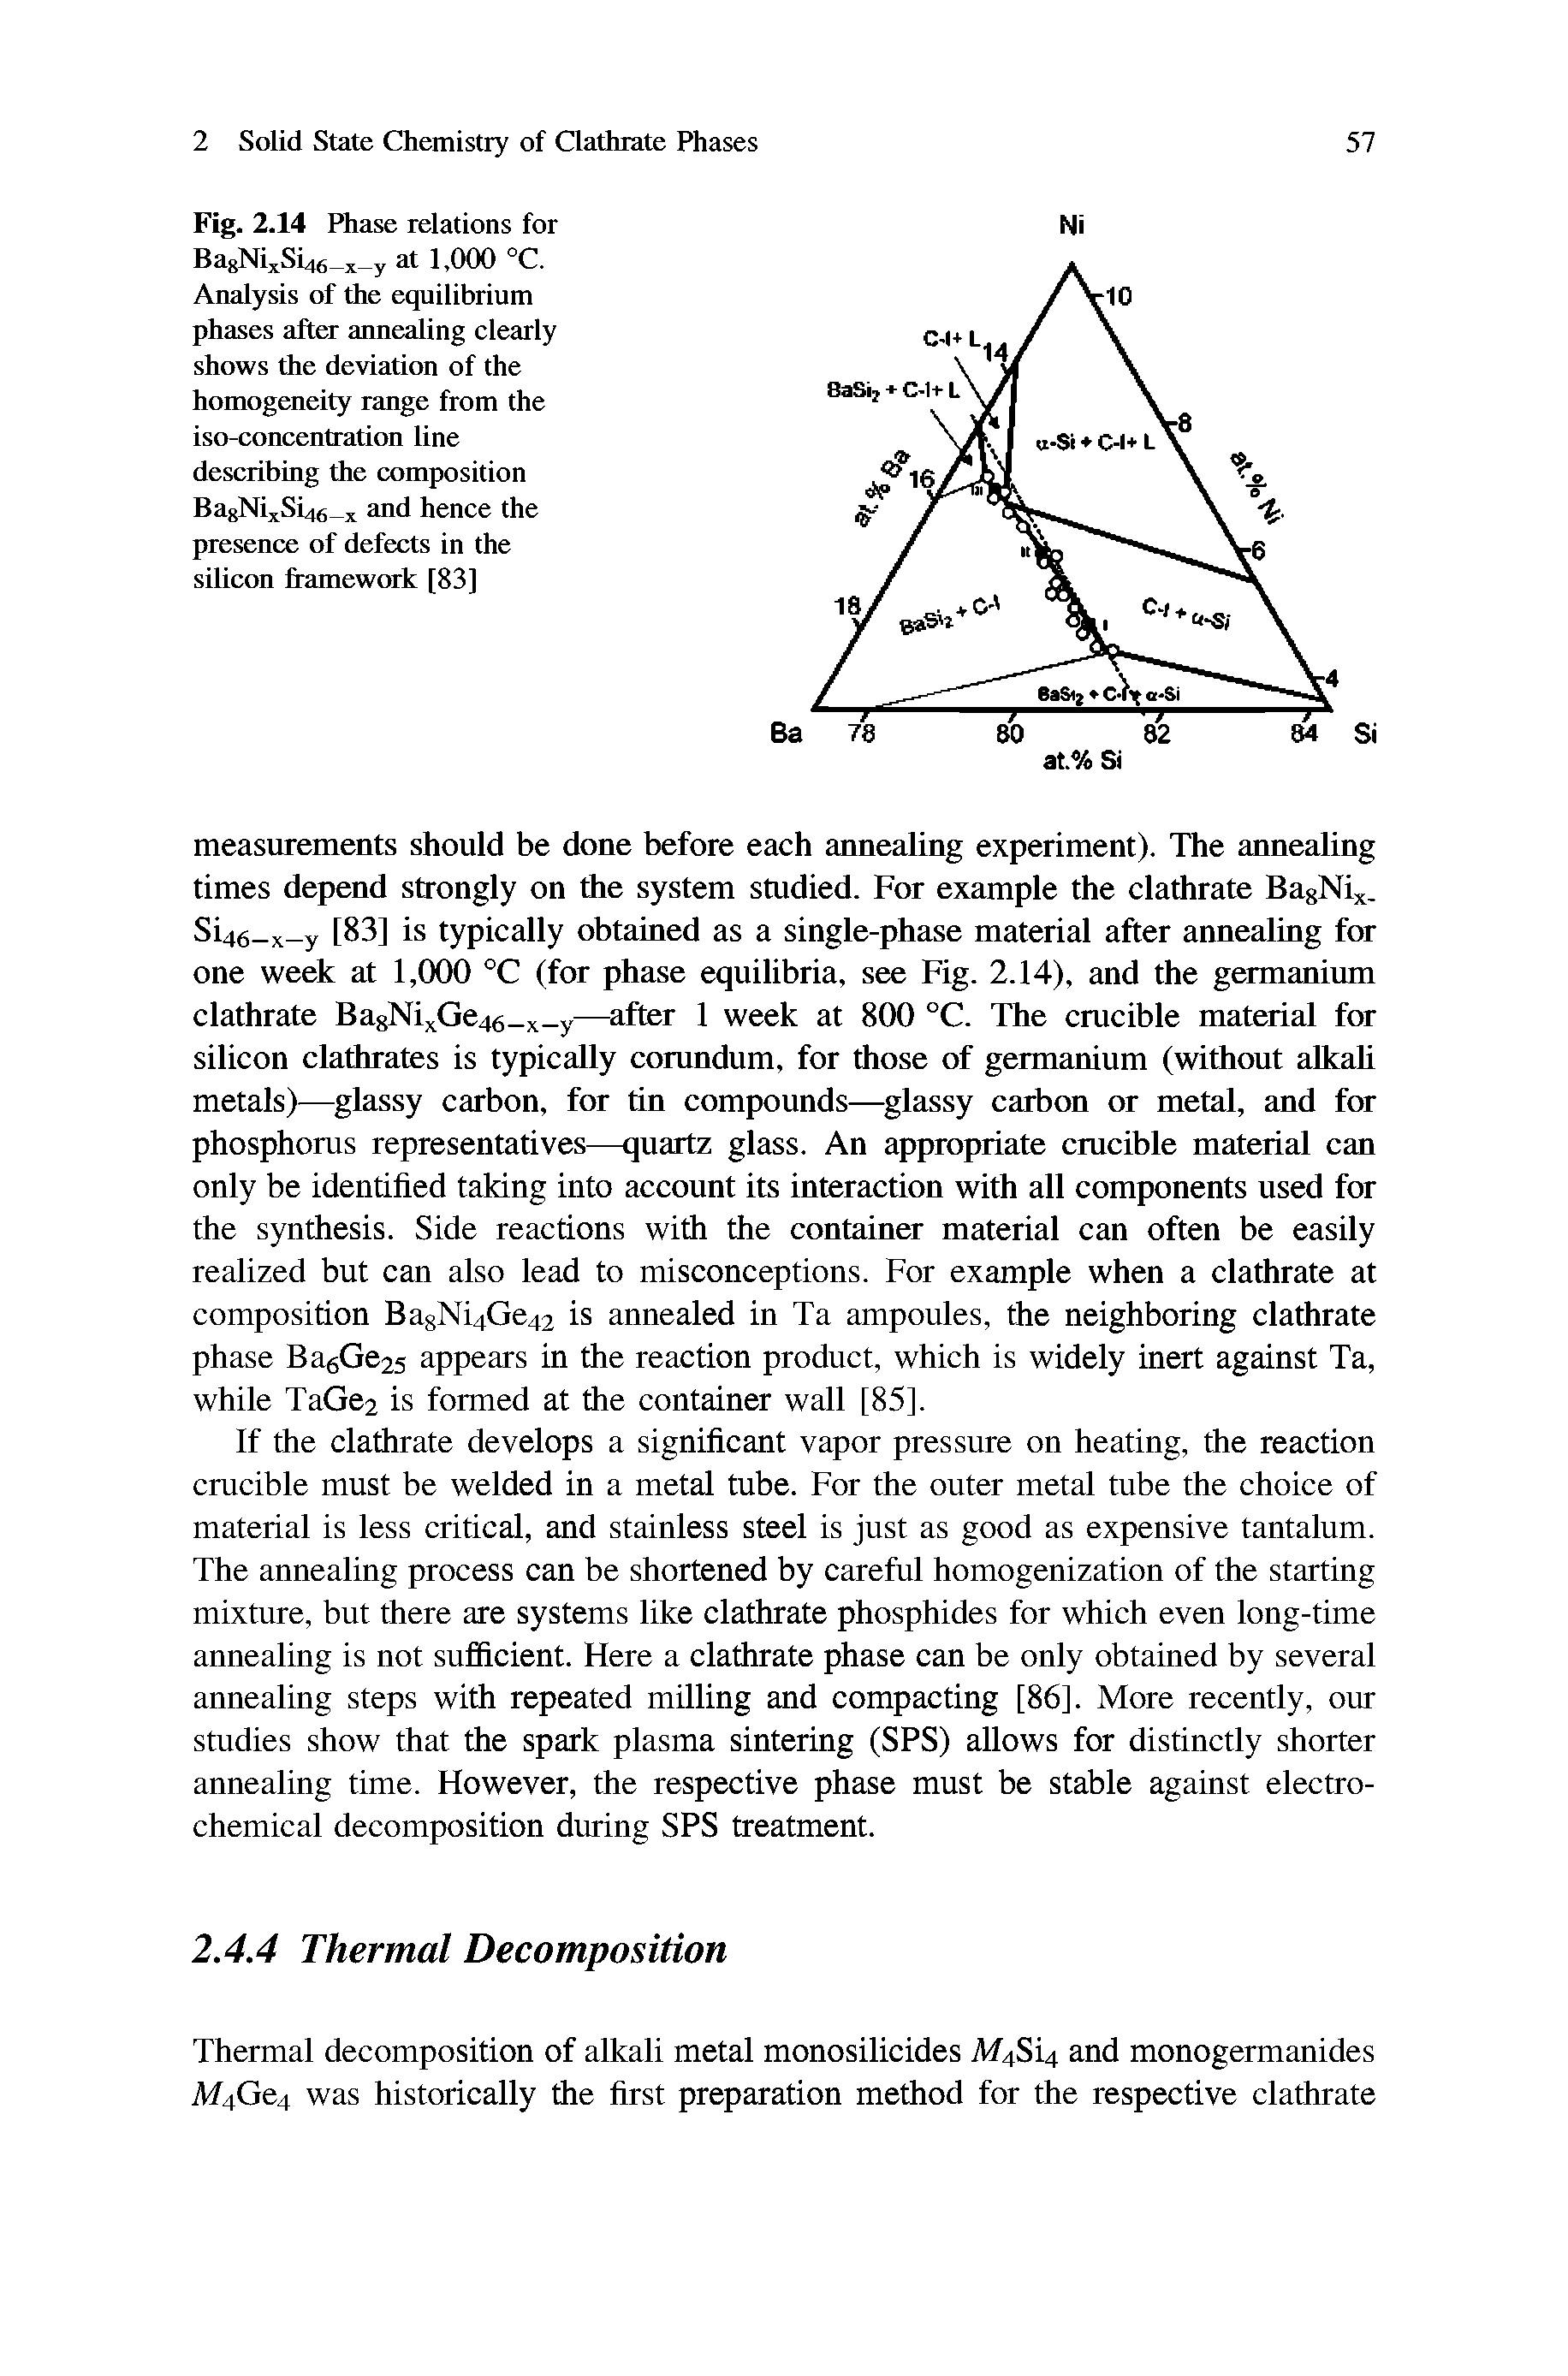 Fig. 2.14 Phase relations for BagNUSi46-x-y at 1,000 °C. Analysis of the equilibrium phases after annealing clearly shows the deviation of the homogeneity range from the iso-concentration line describing the composition BagNixSi46 x and hence the presence of defects in the silicon framework [83]...